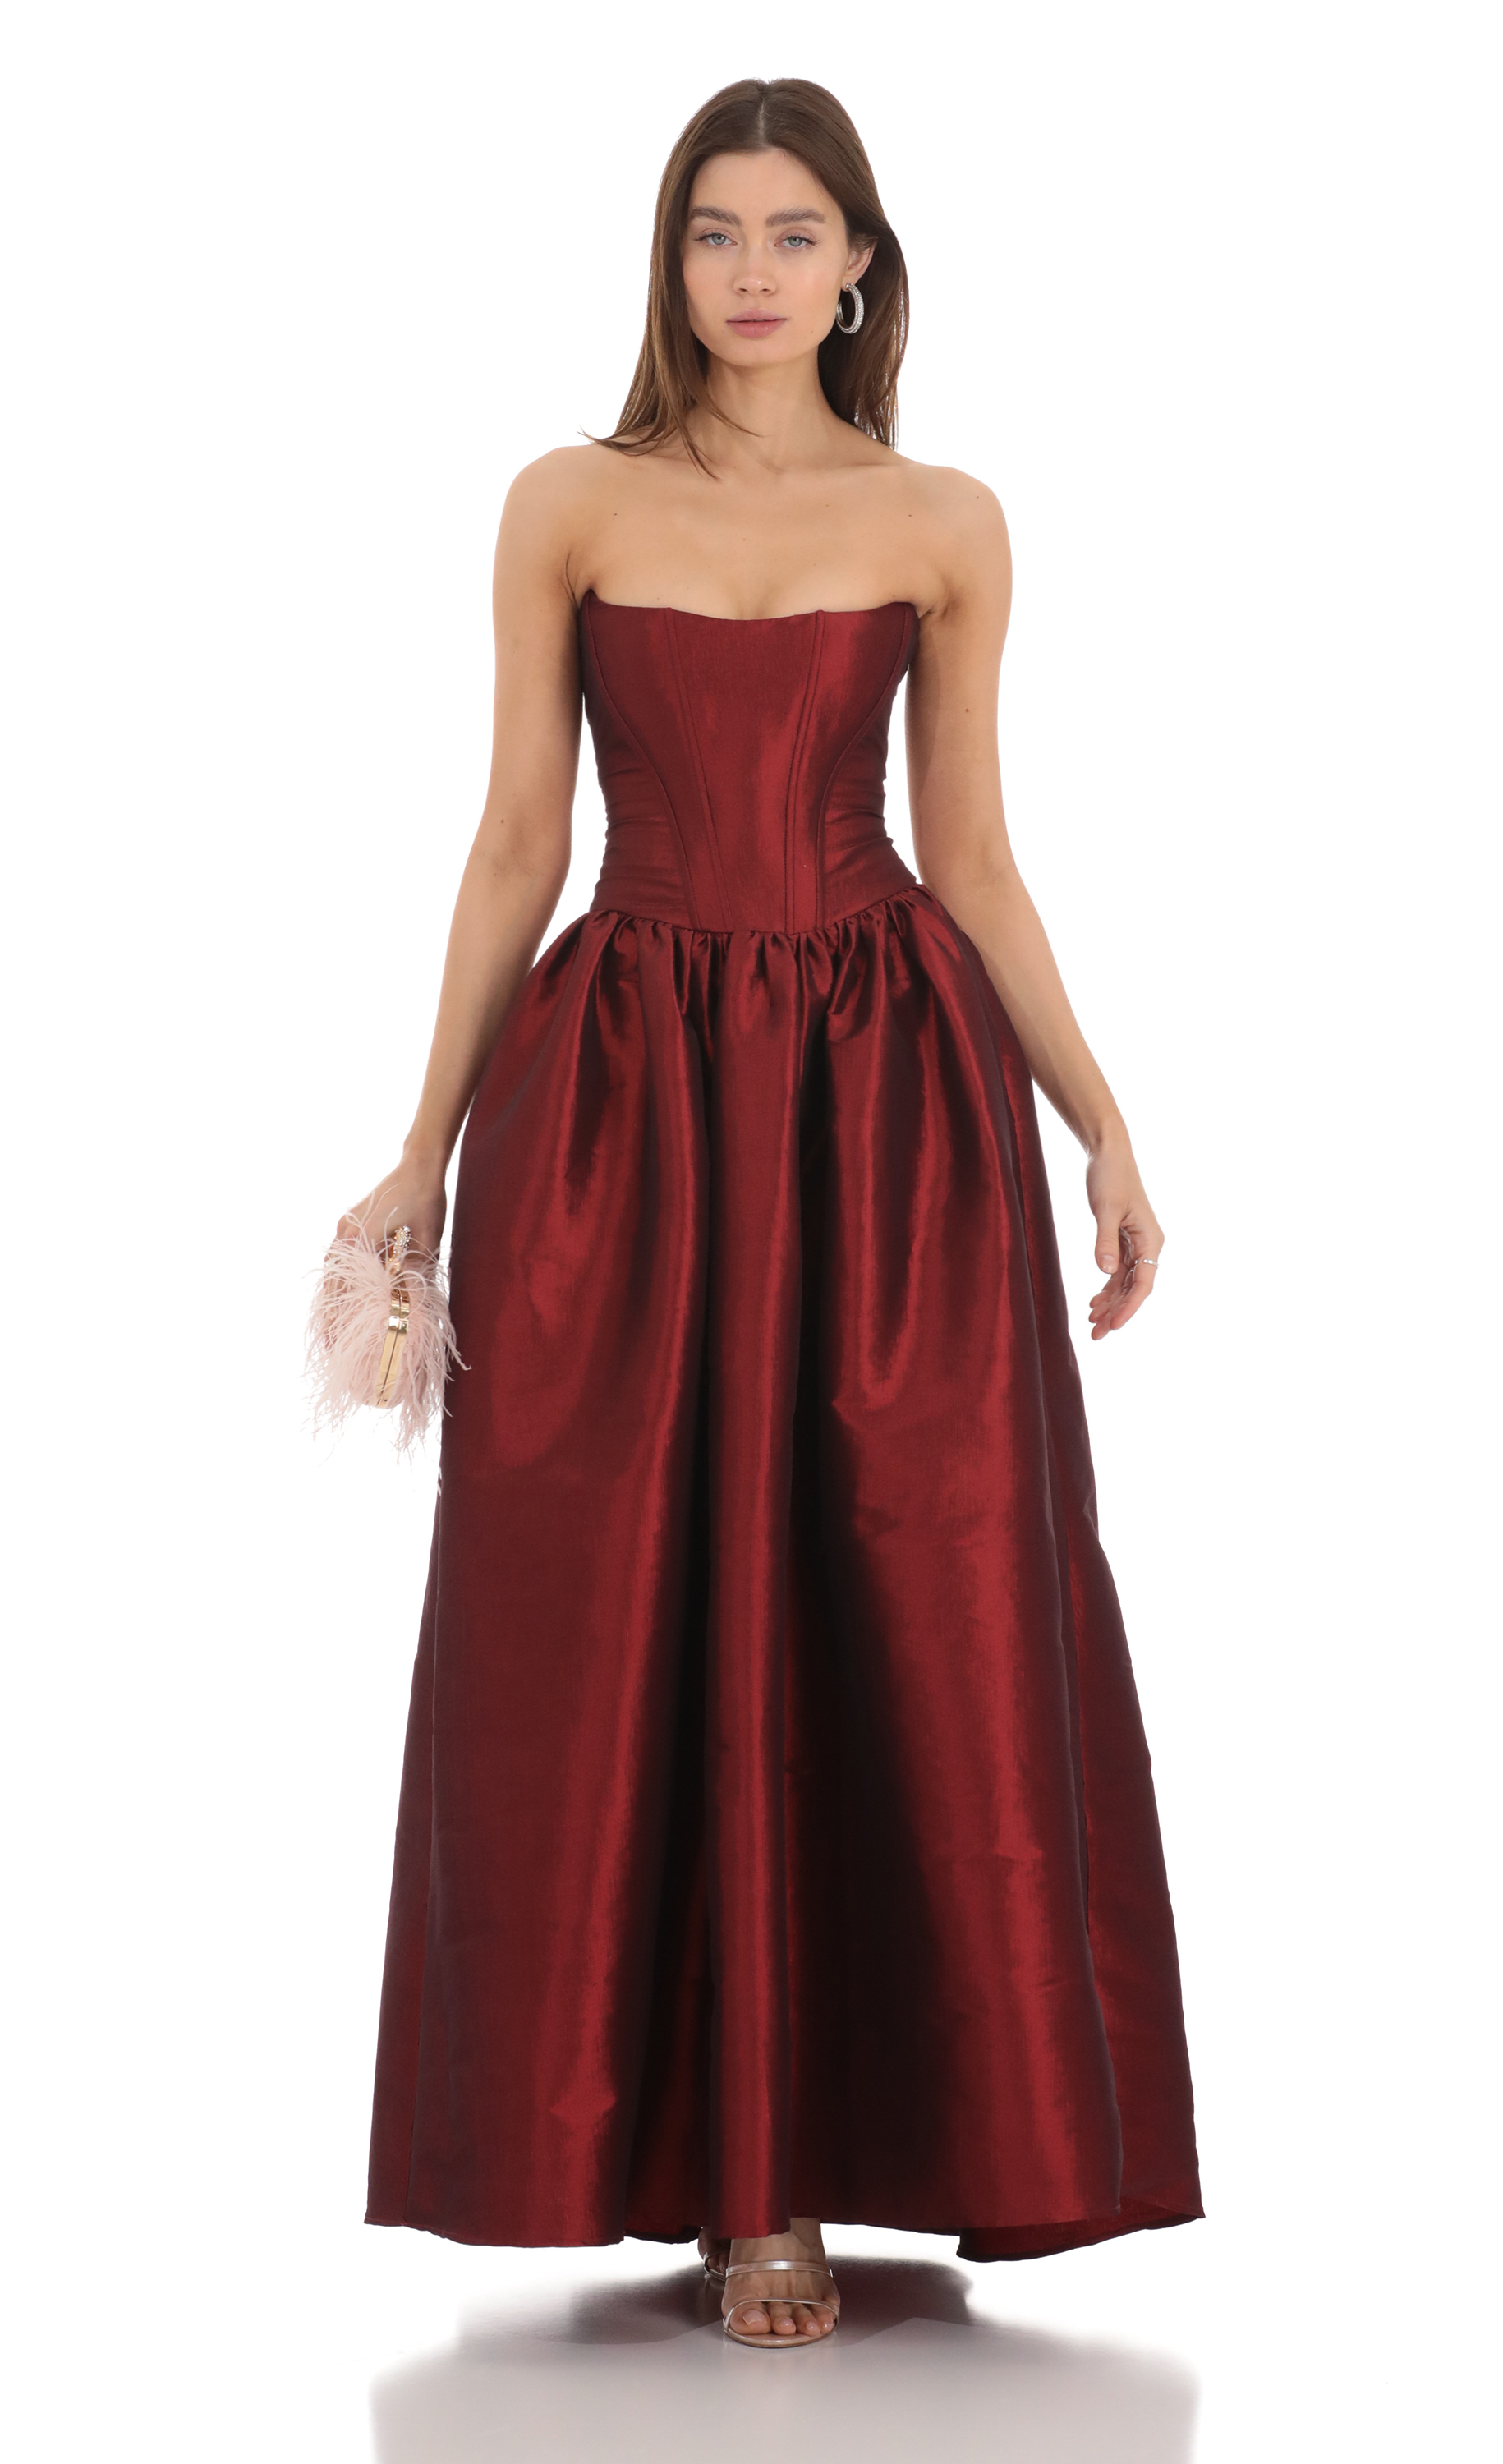 Strapless Corset Gown in Deep Red